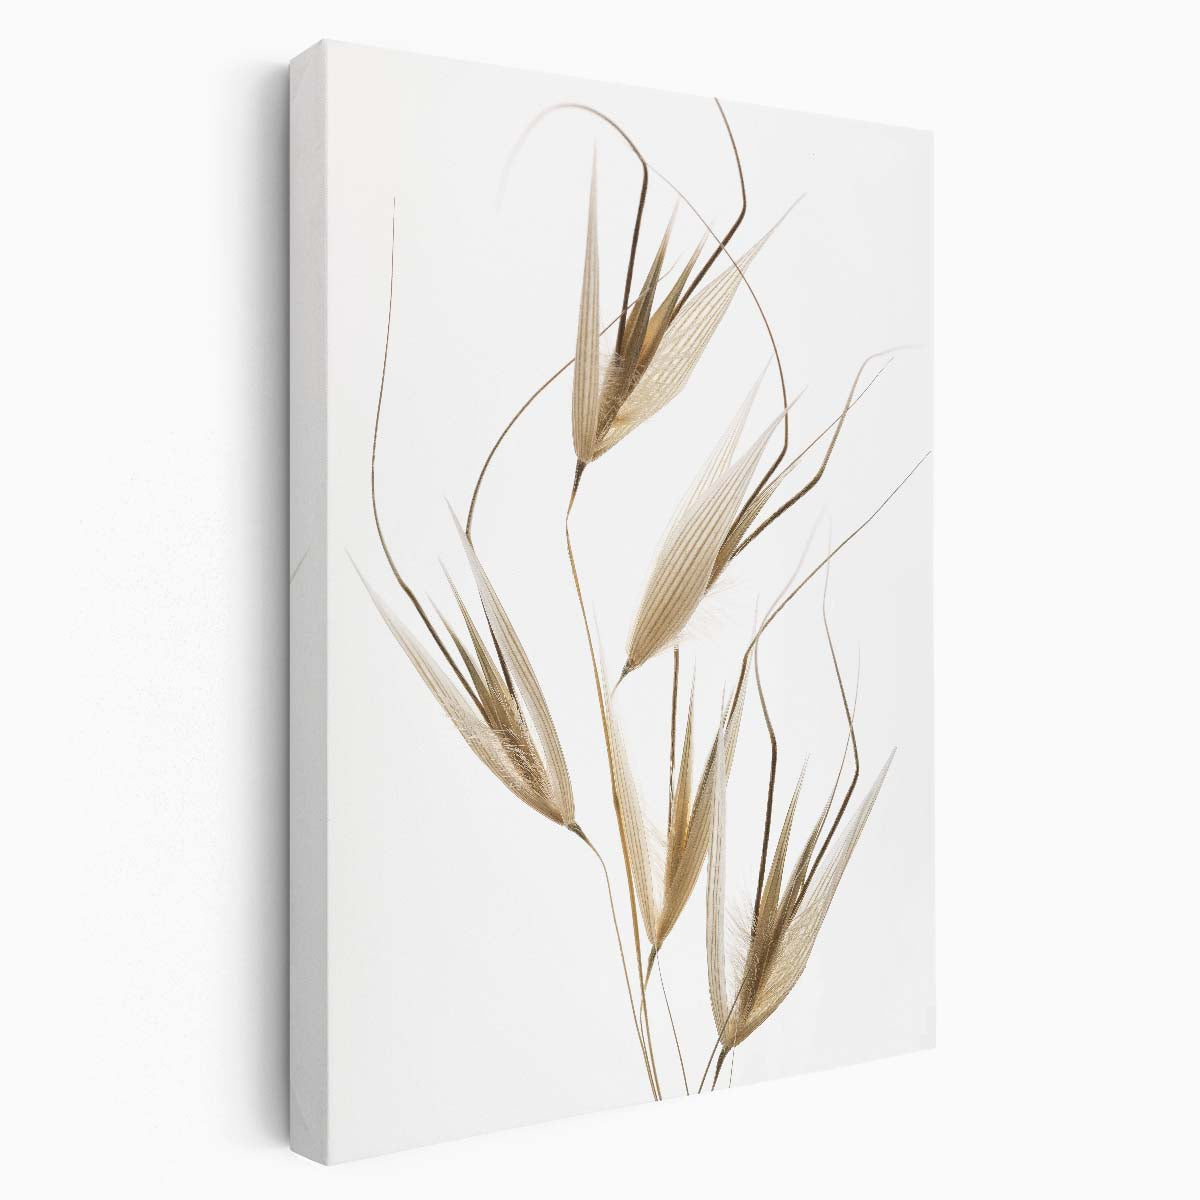 Serene Zen Wheat Photography Minimalistic, Peaceful Still Life Art by Luxuriance Designs, made in USA